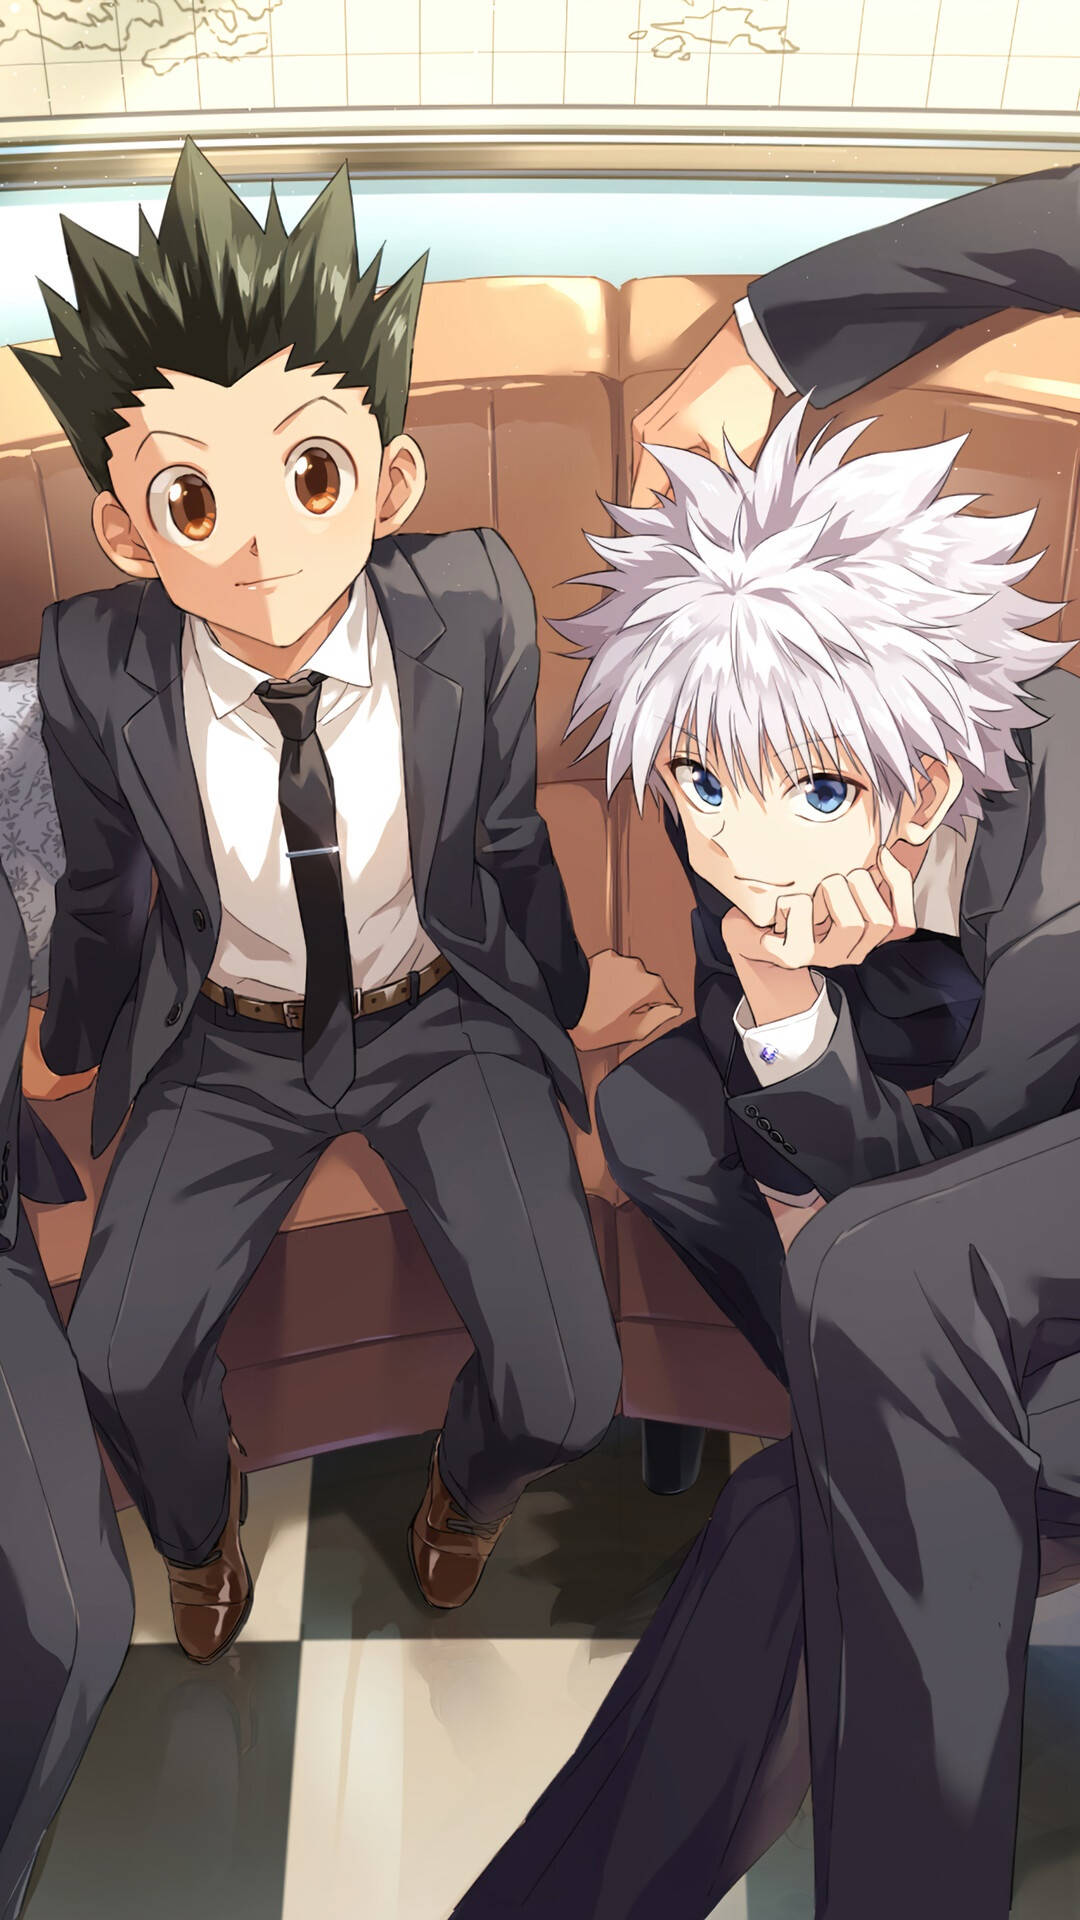 Cool Killua Is Ready For His Next Mission. Background